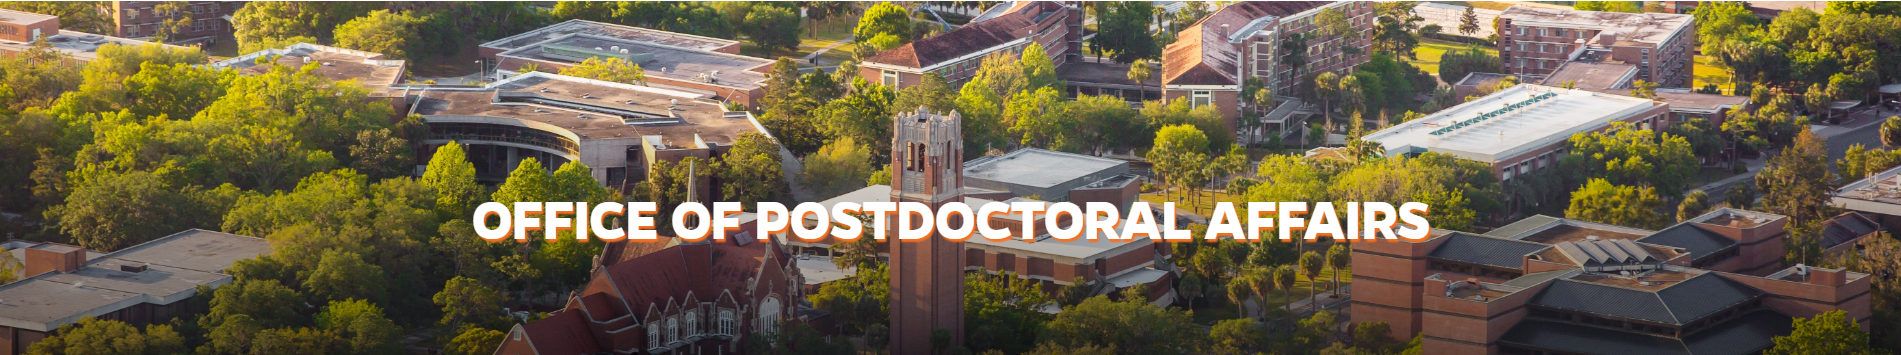 Office of Postdoctoral Affairs